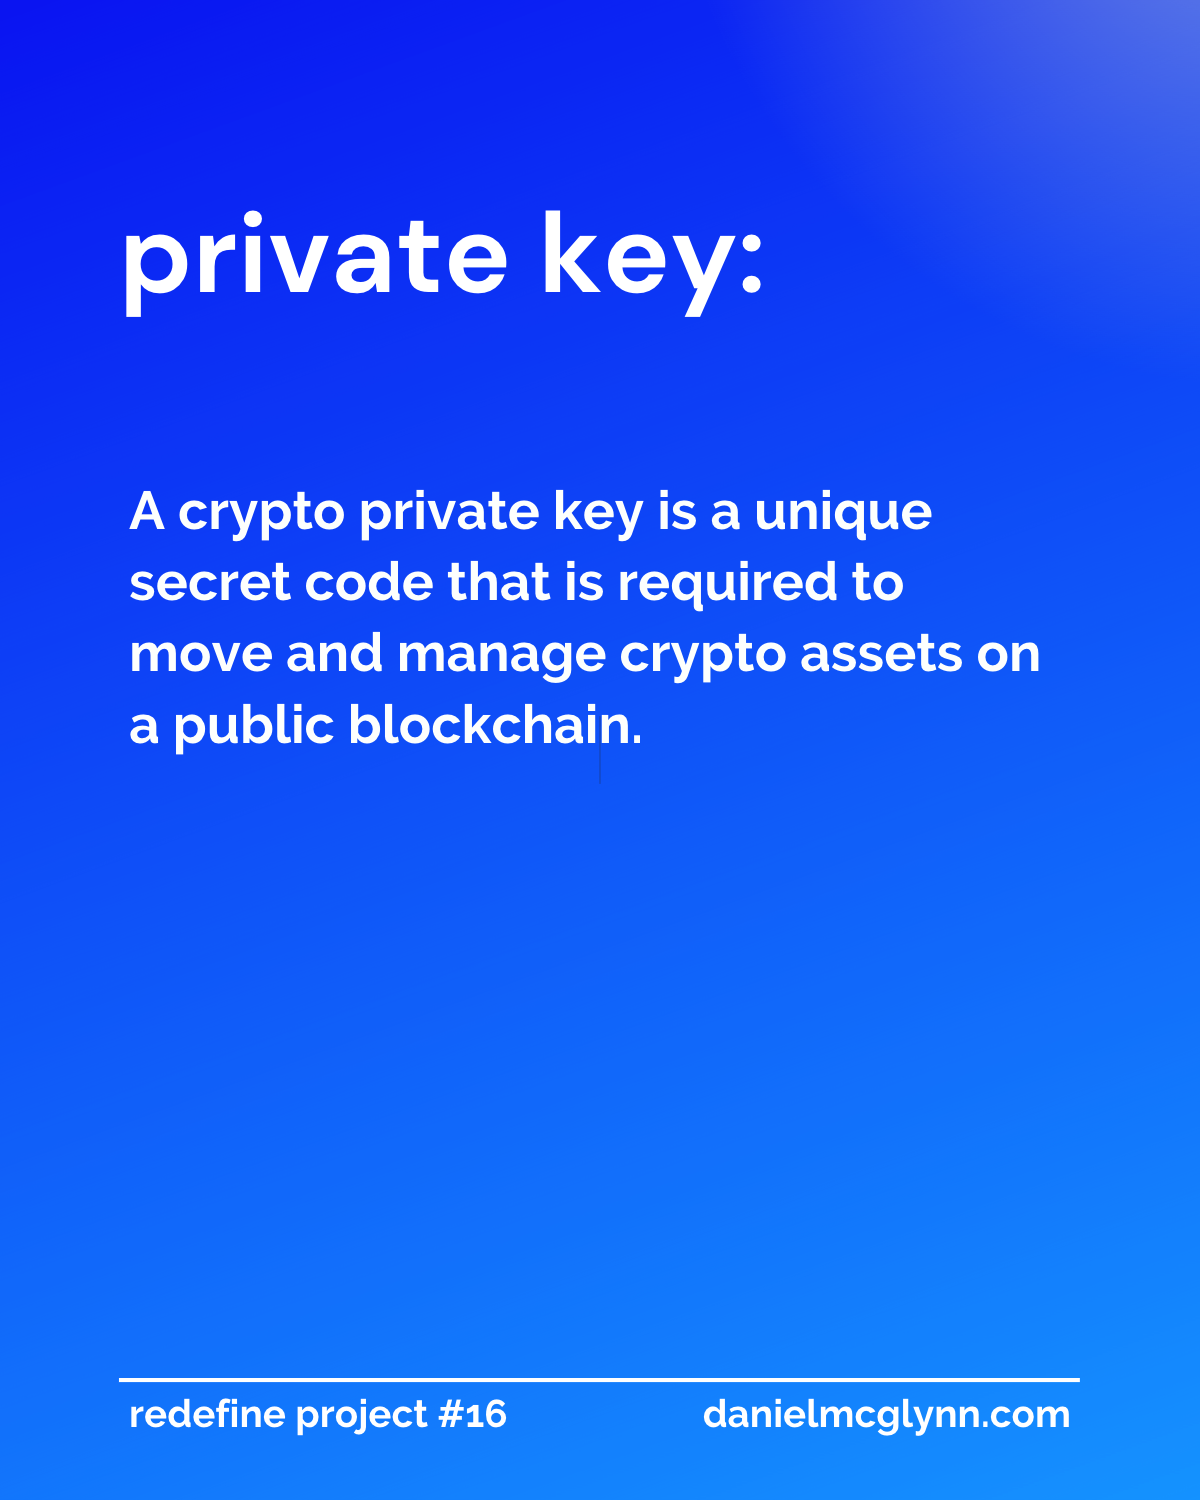 Private key crypto is a unique secret code that is required to move and manage crypto assets on a public blockchain. 